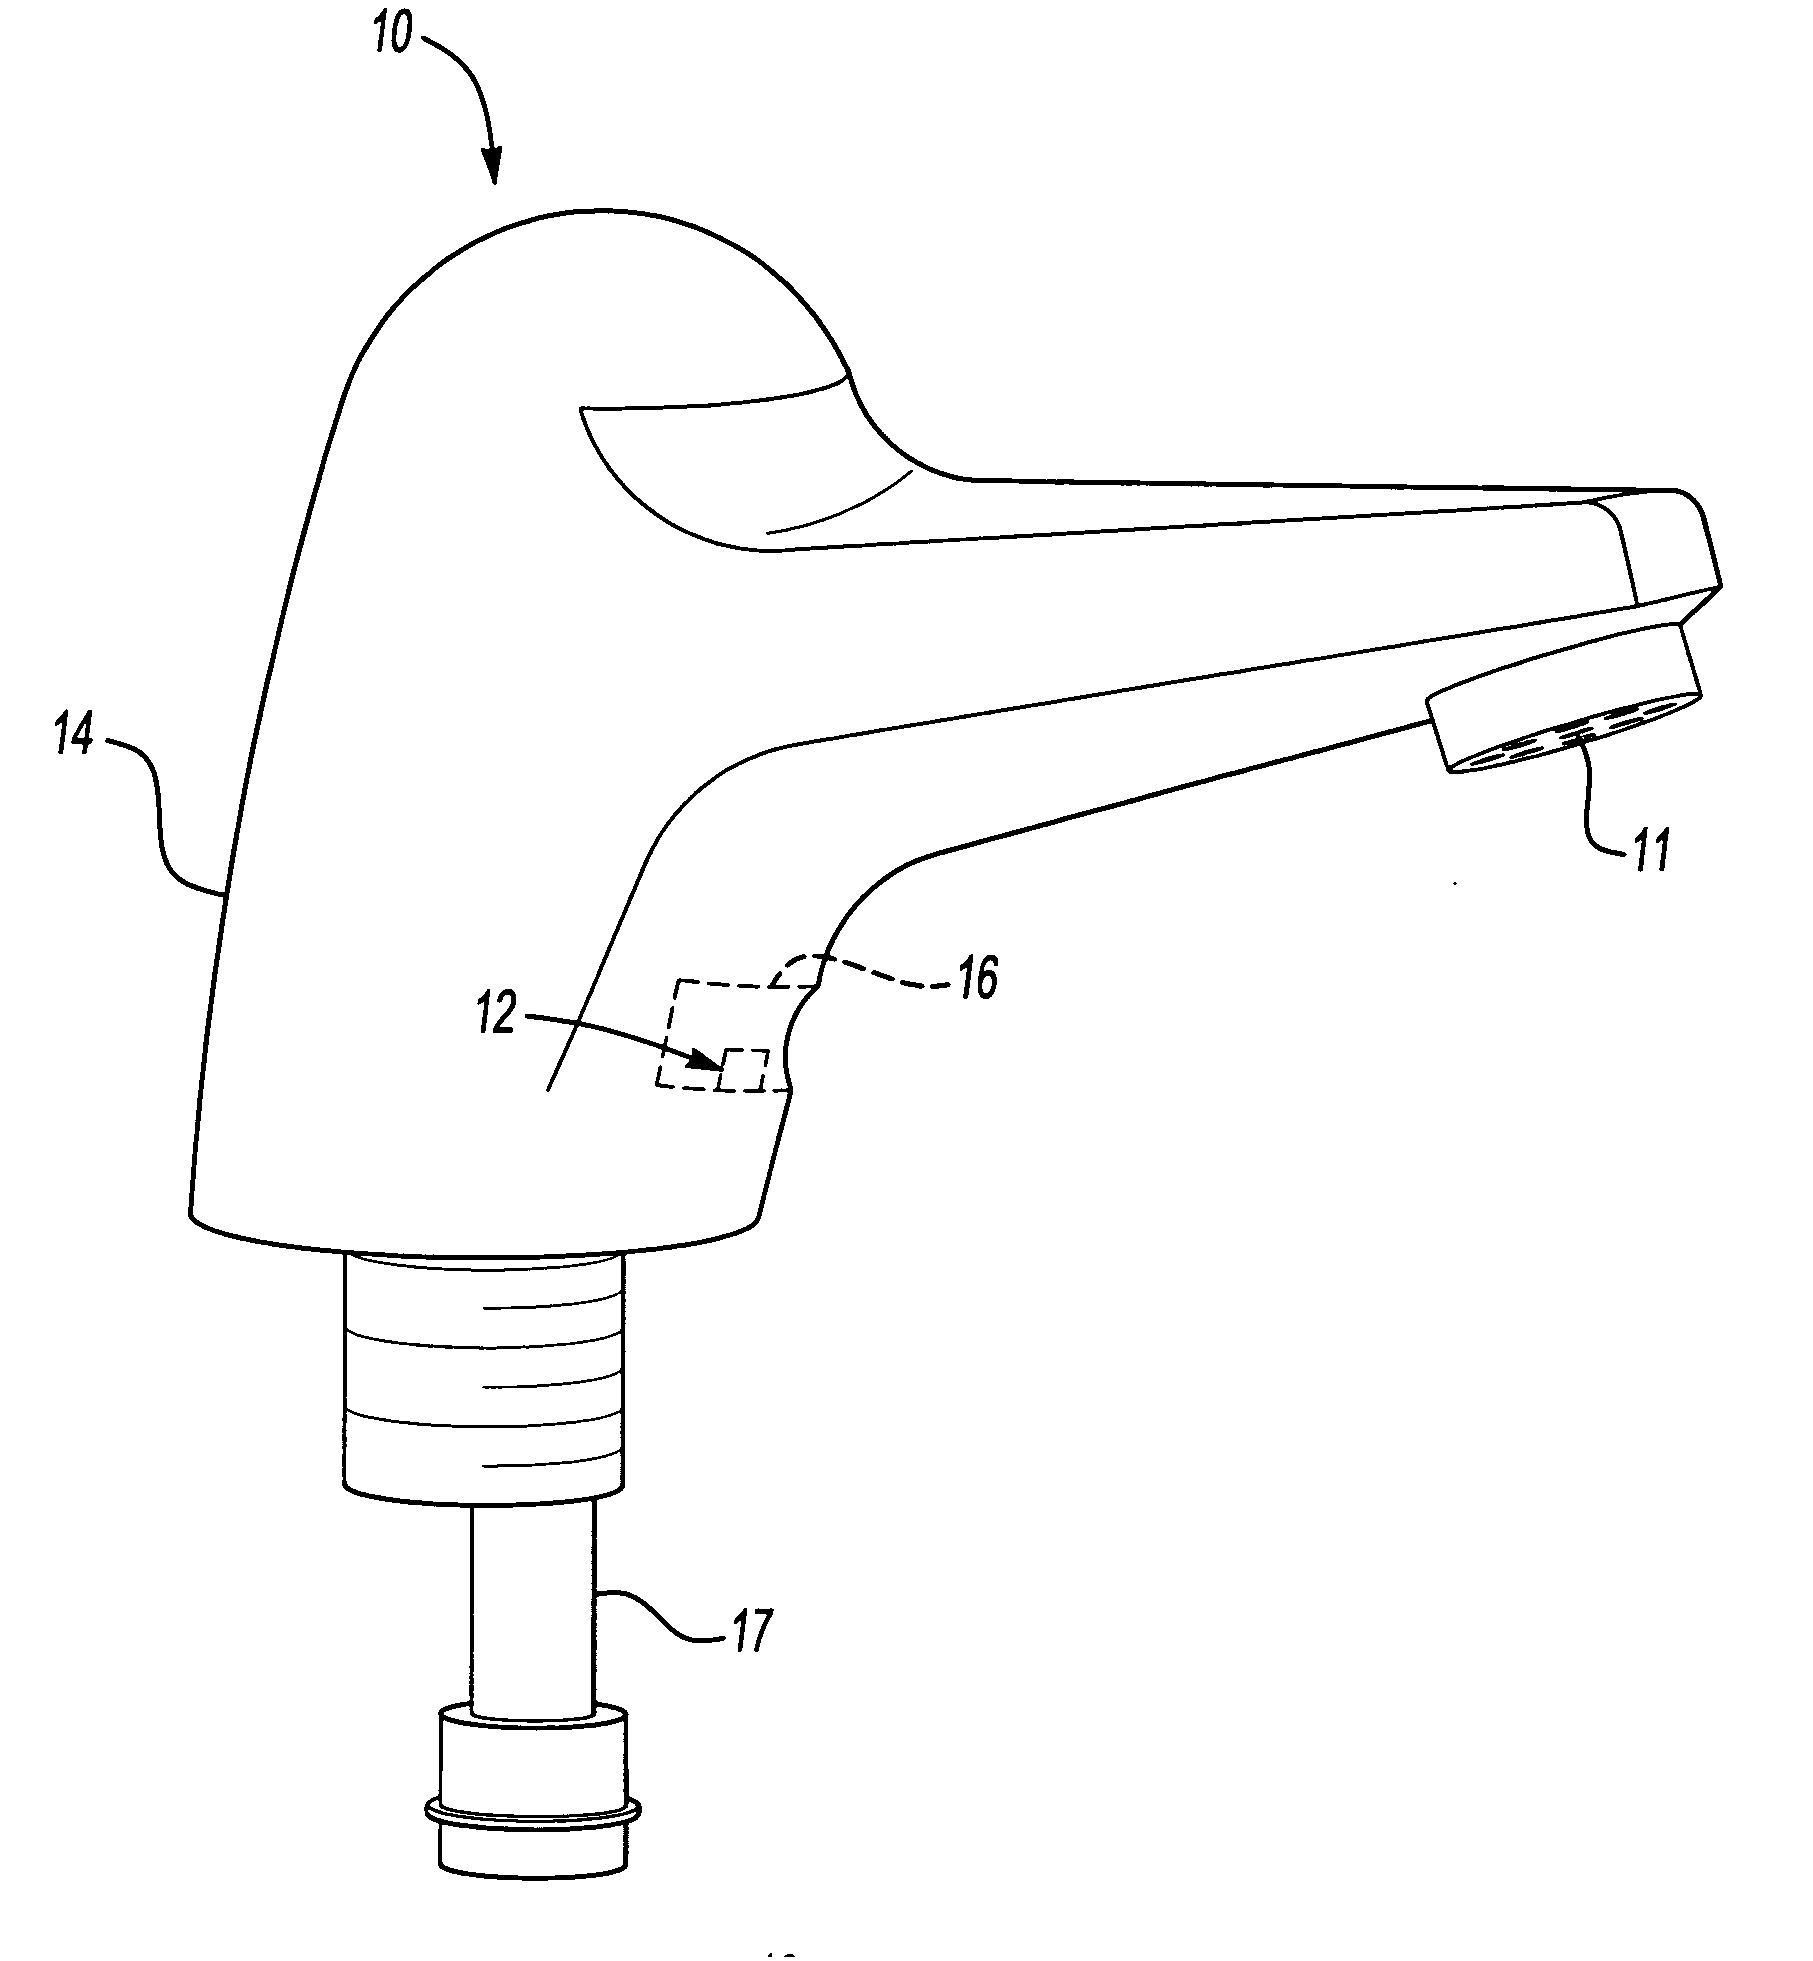 Control for an automatic plumbing device